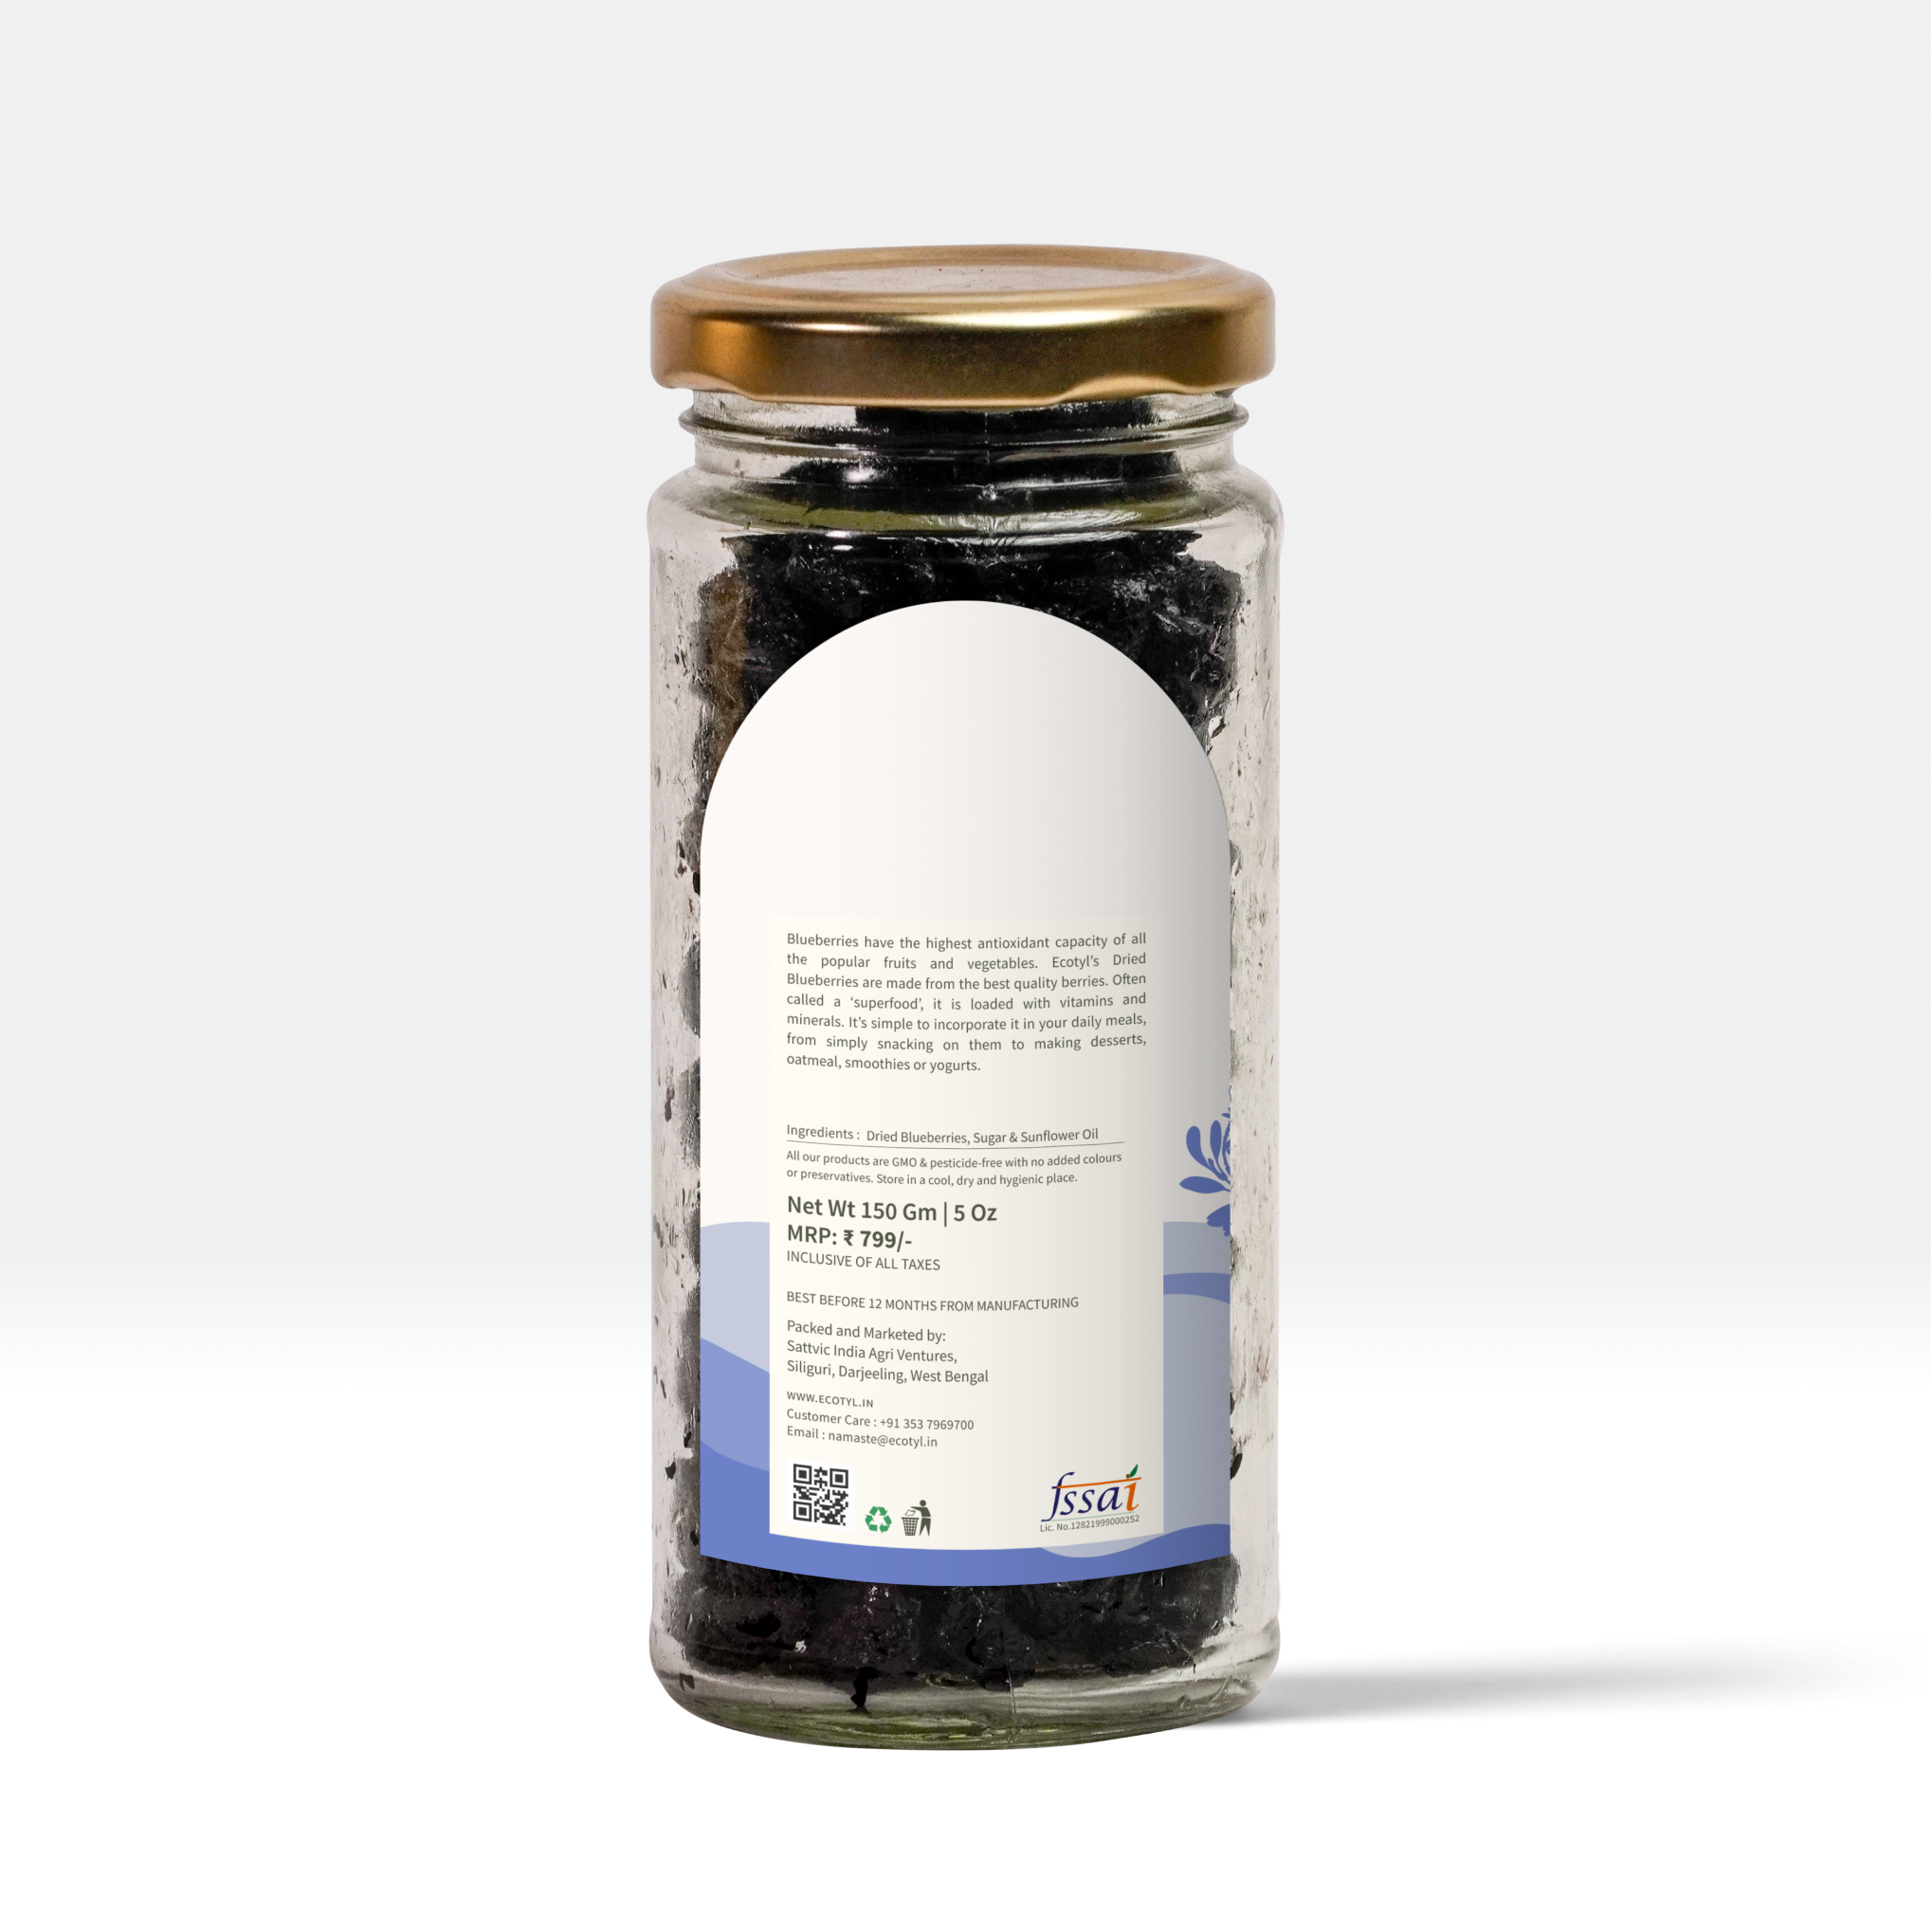 Buy Ecotyl Natural Dried Blueberries - 150g at Best Price Online